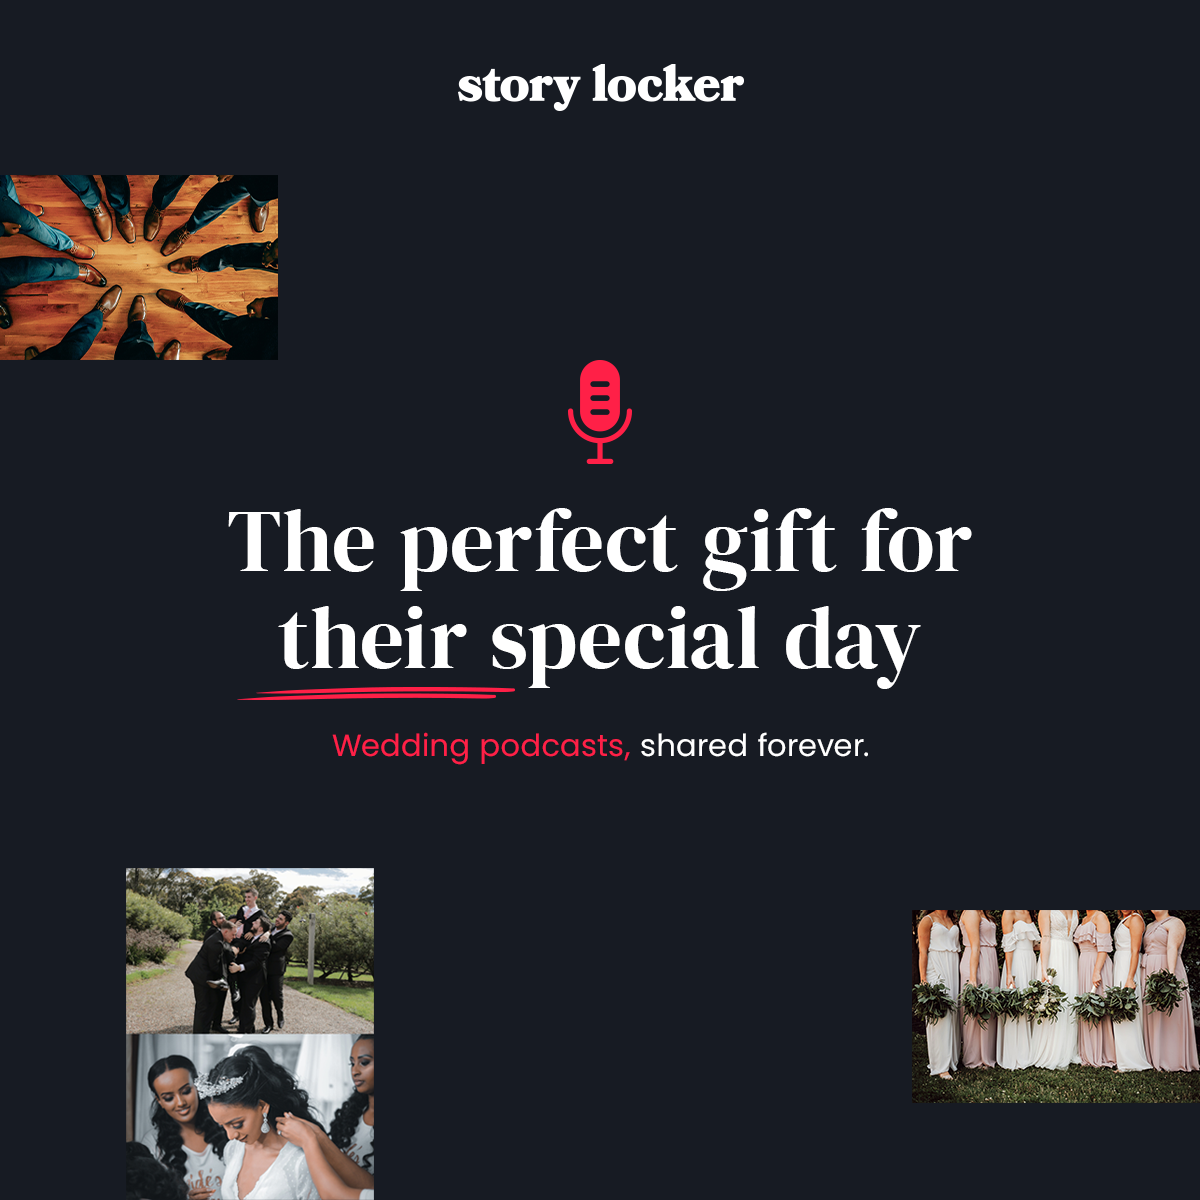 Story locker wedding podcast graphic saying the perfect gift for their special day